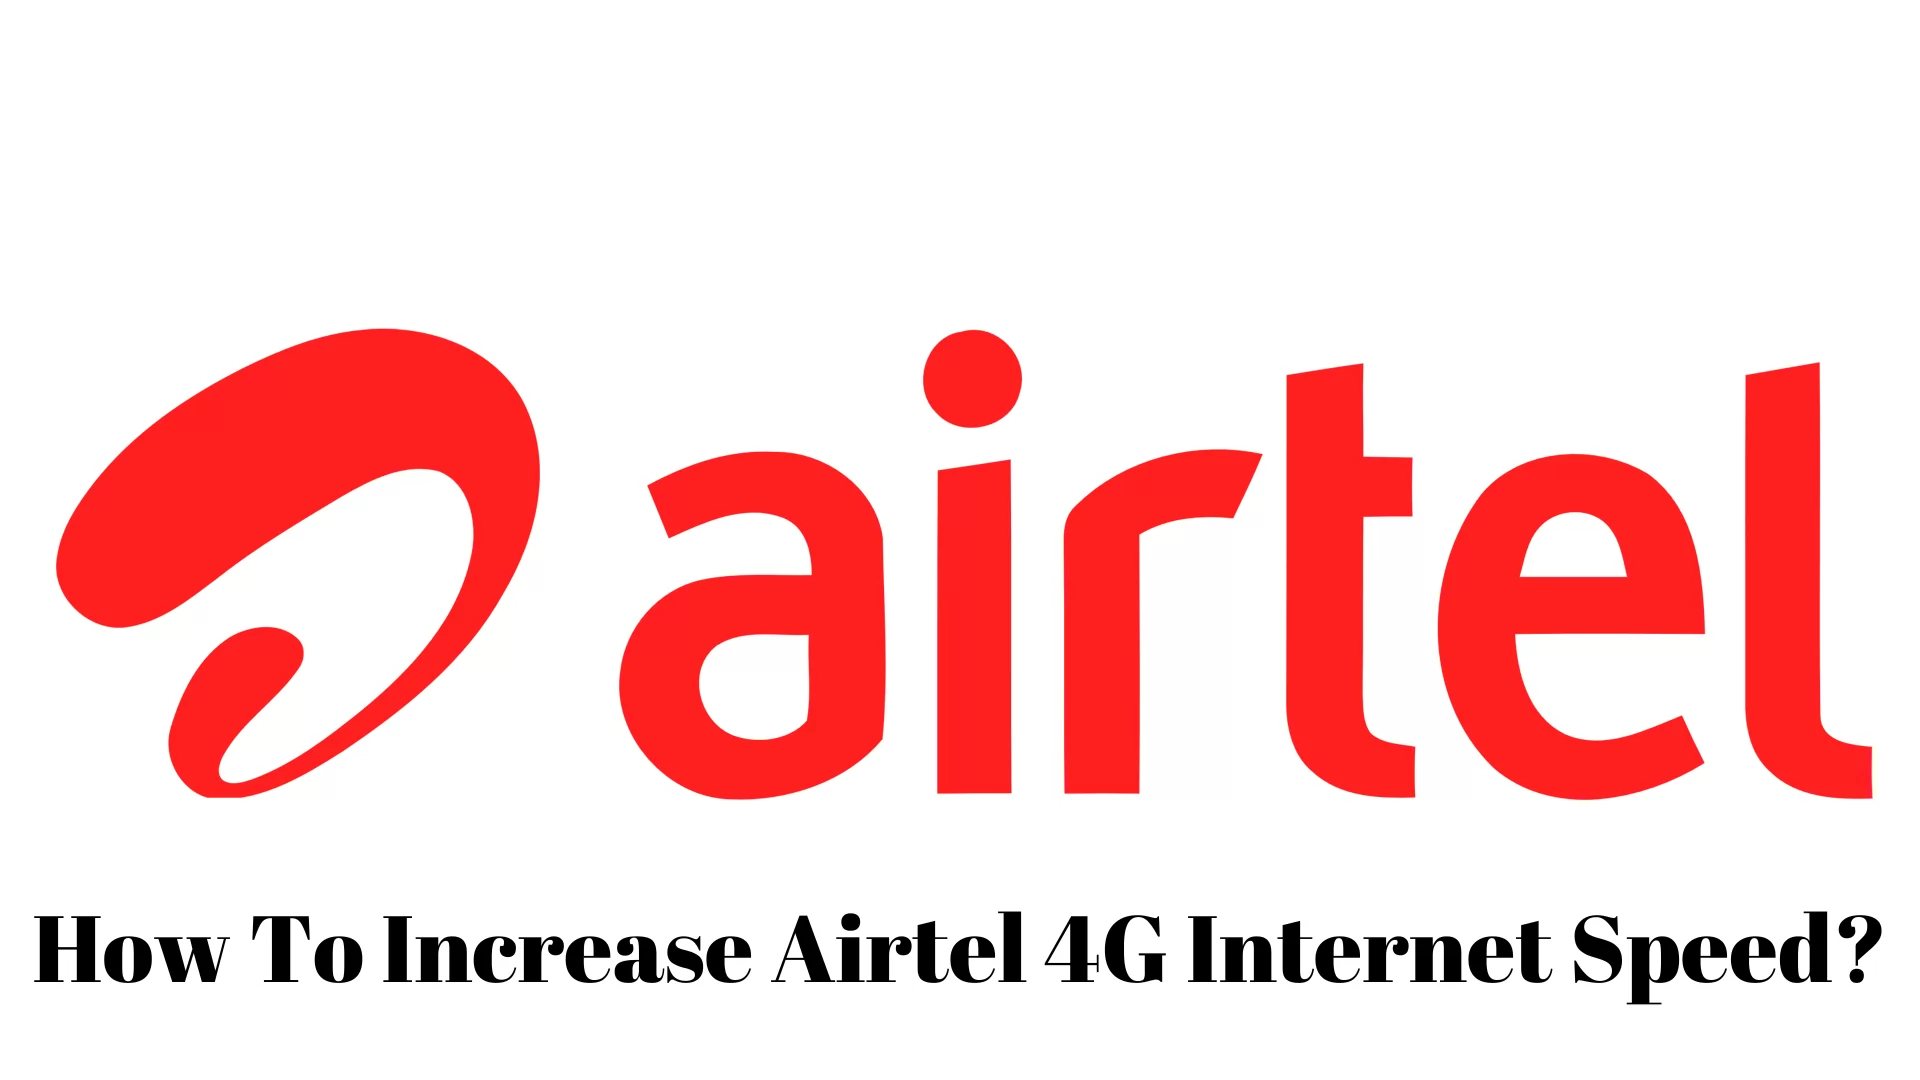 How To Increase Airtel 4G Internet Speed?